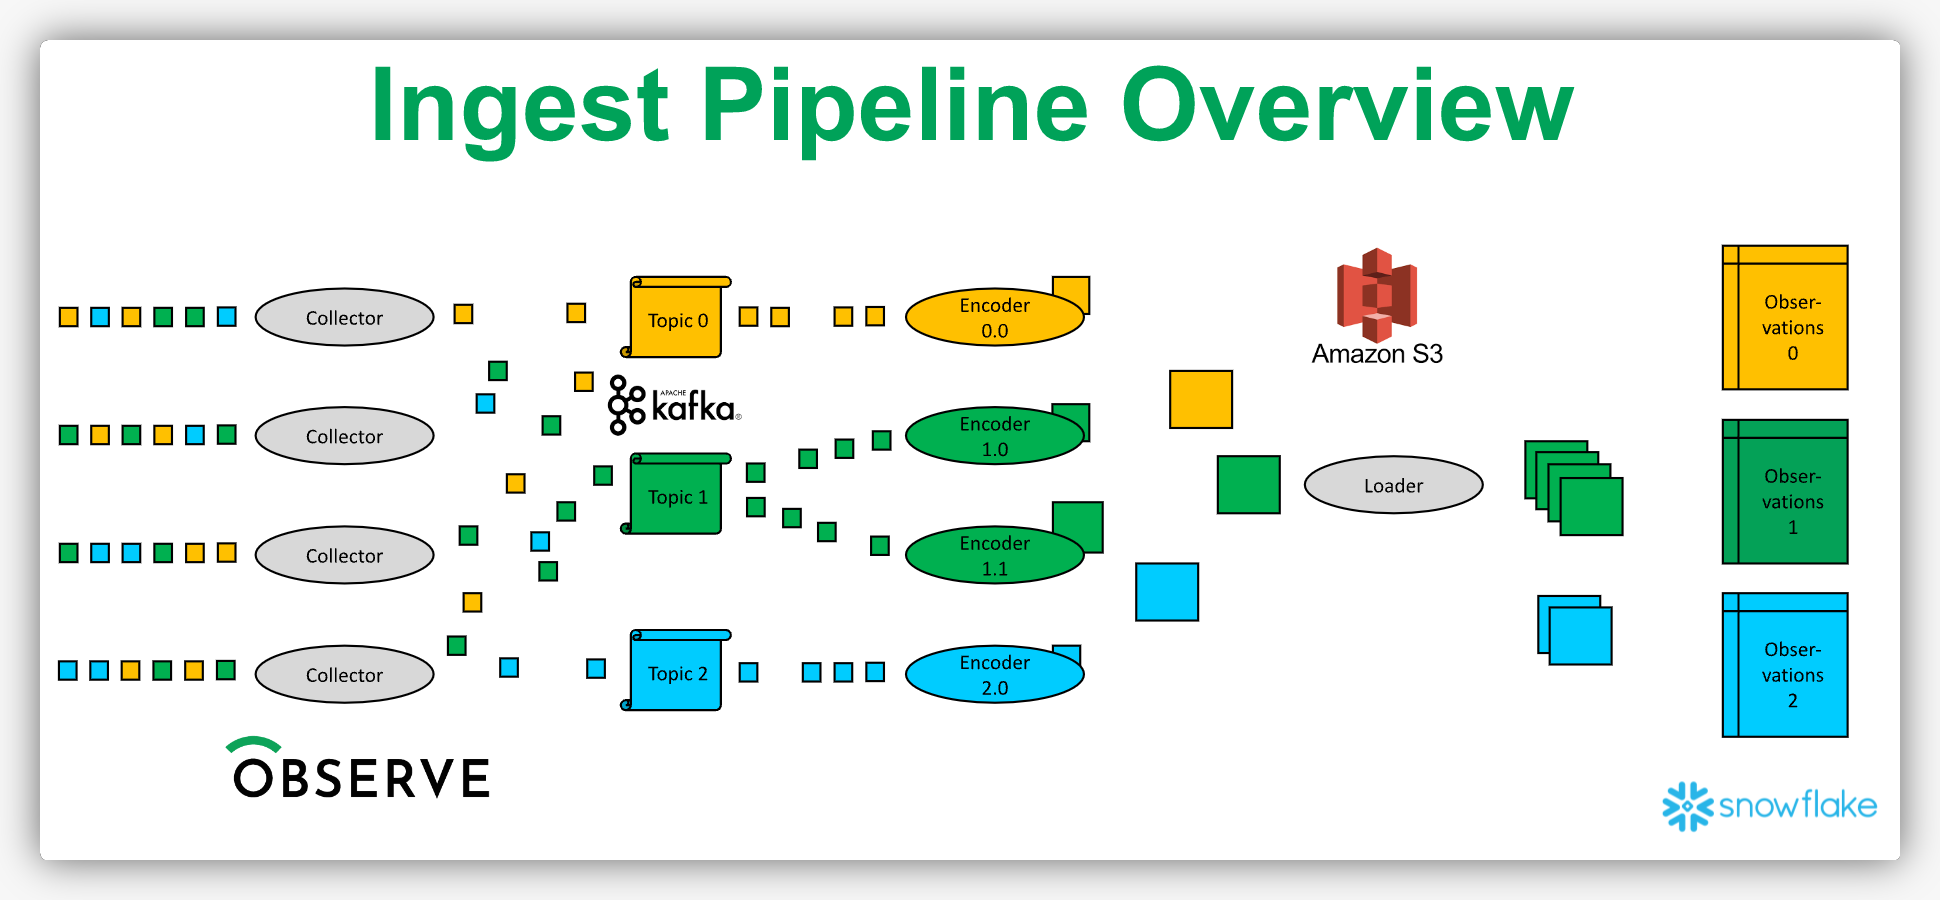 Observe ingest pipeline overview